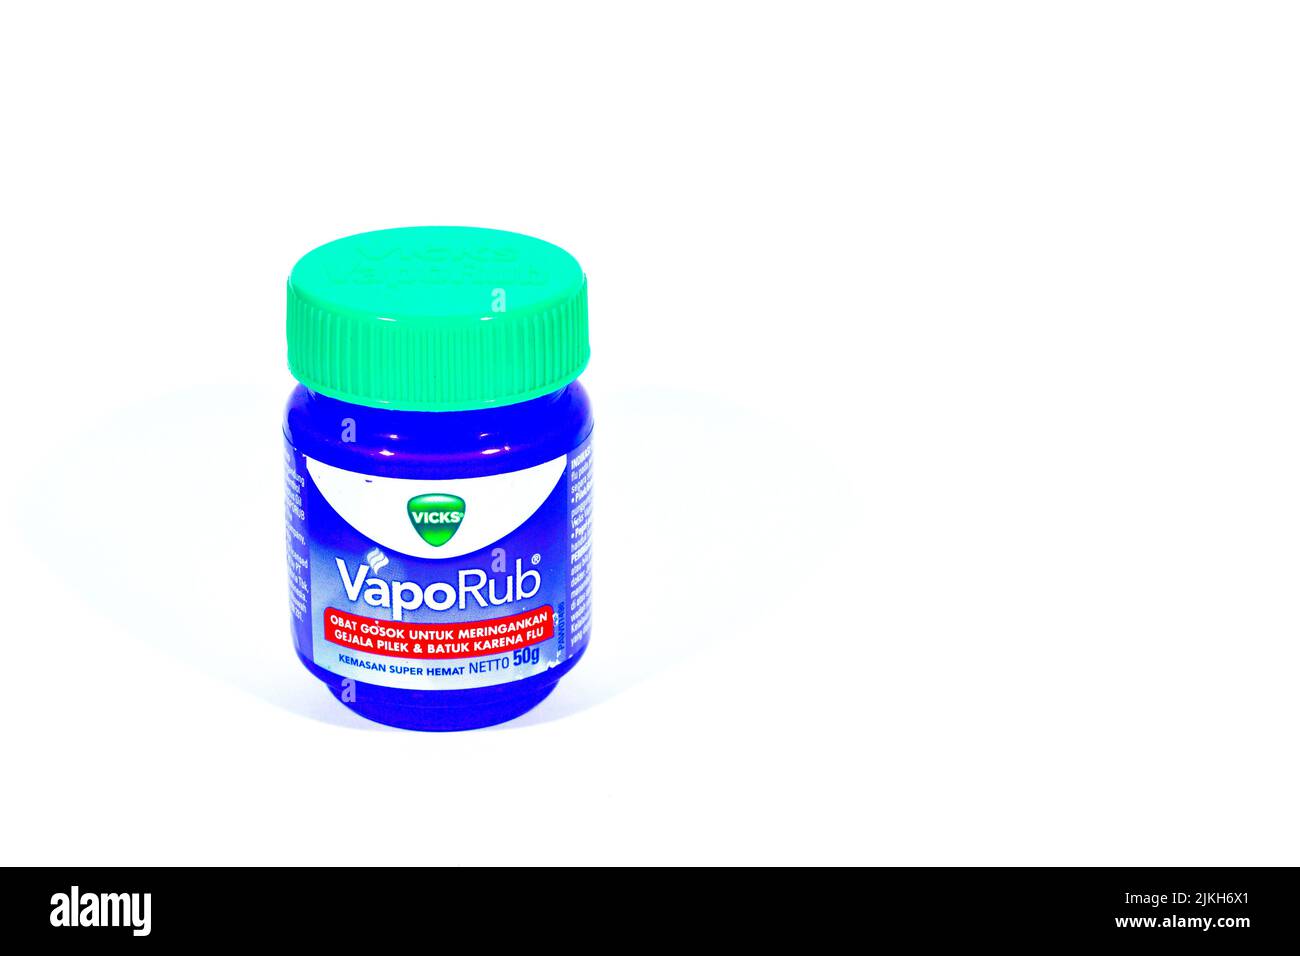 Vicks VapoRub is a mentholated topical ointment, part of the Vicks brand of over-the-counter medications owned by the American consumer goods company Stock Photo